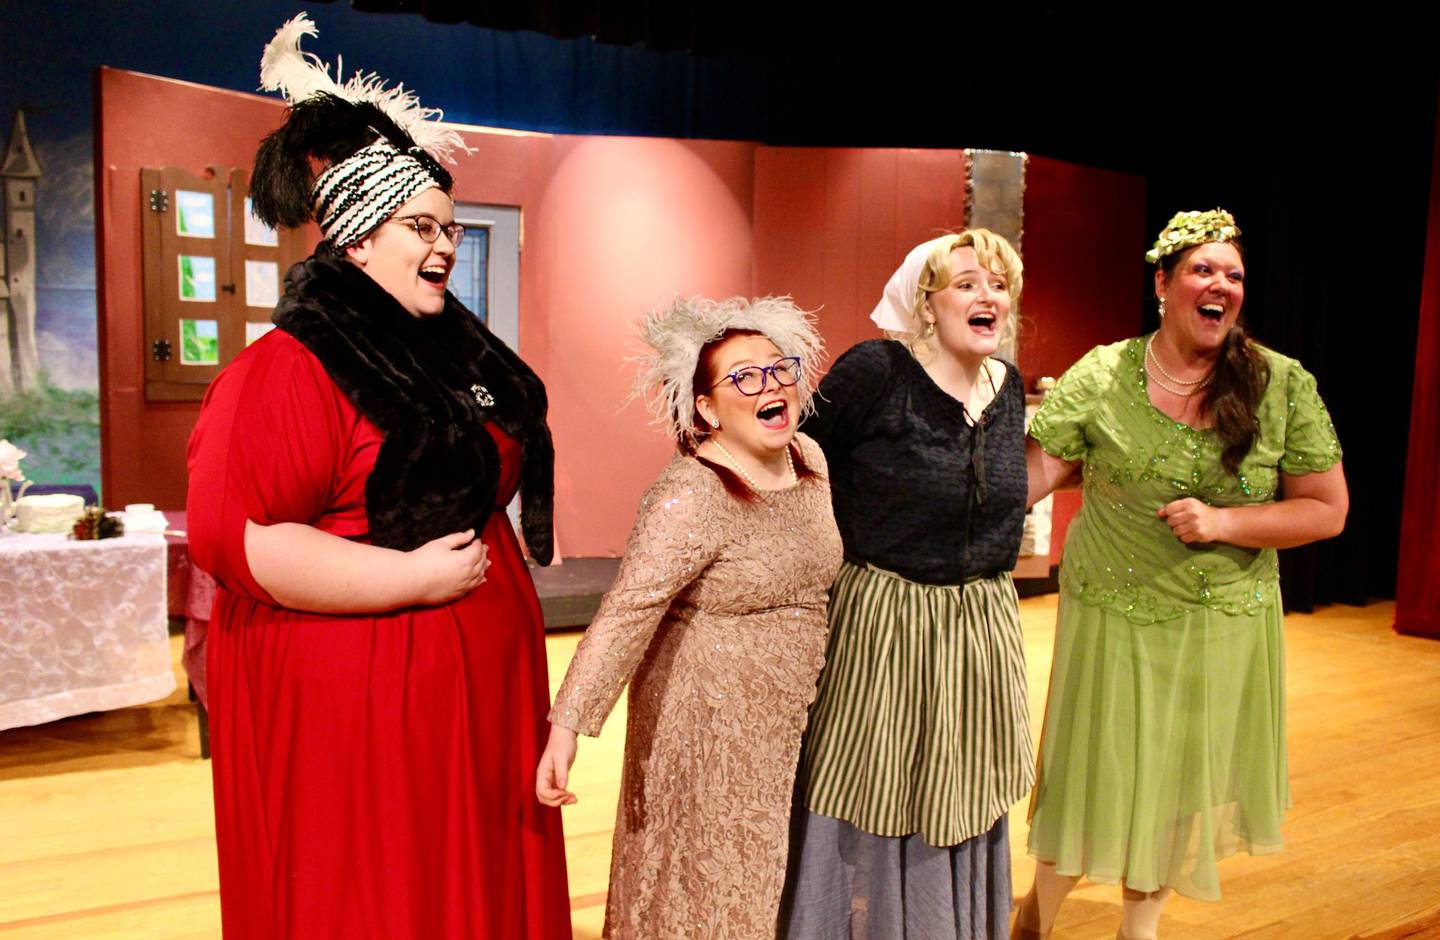 Cinderella's stepmother played by Kim Freeman; stepsister Joy played by Cheyanne Sunken; Cinderella played by Alexis Trammel and stepsister Portia played by Becky Kpa sing about "A Lovely Night" during a rehearsal for Engle Lane's performance of "Cinderella."